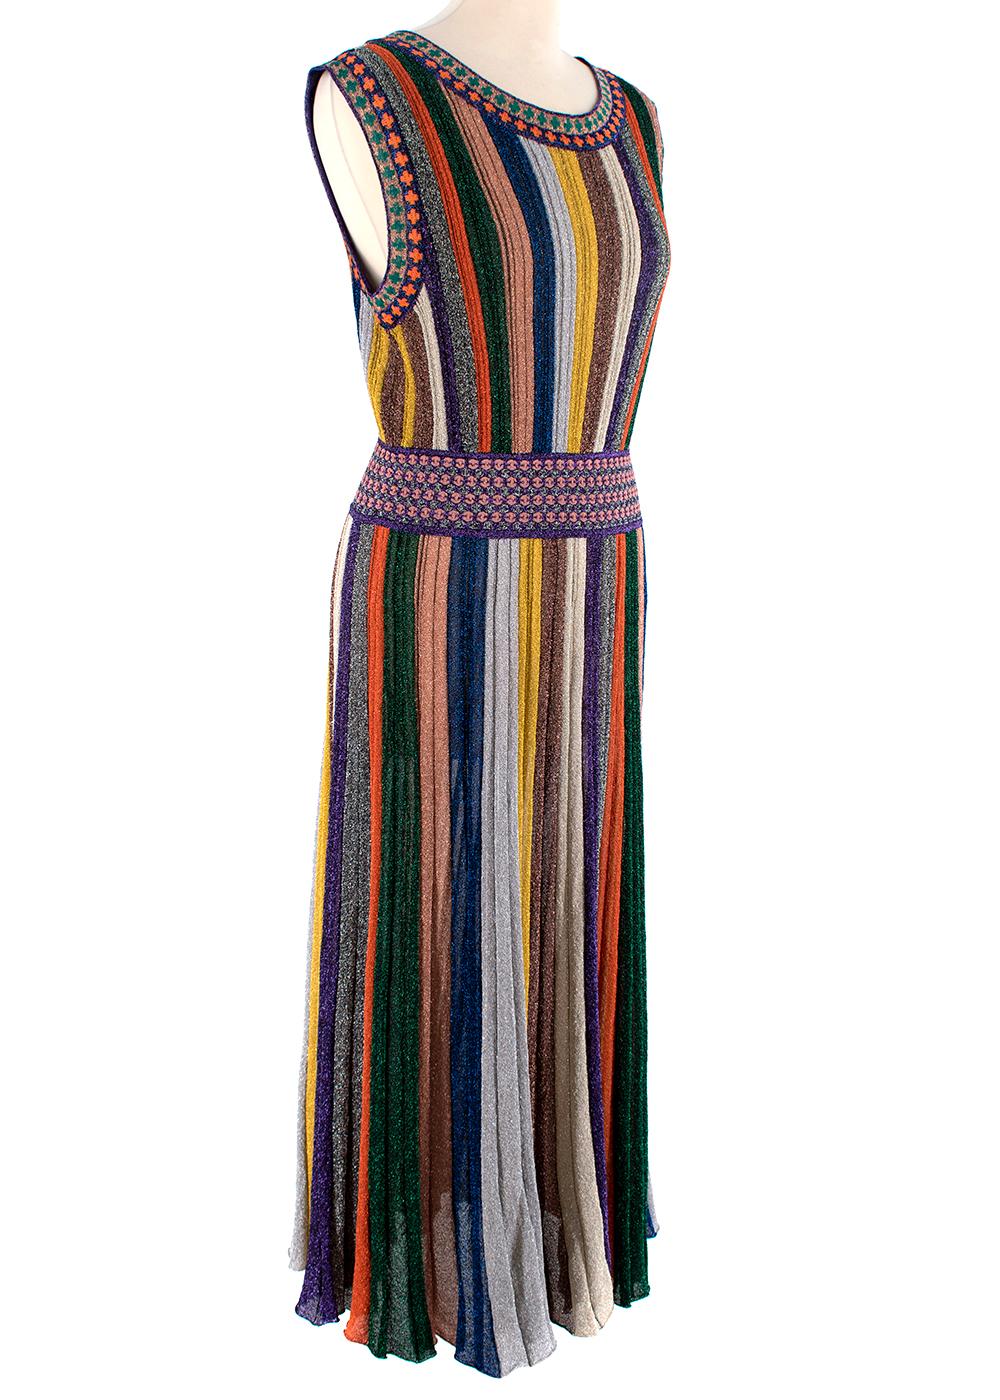 Missoni Metallic Knit Striped Sleeveless Dress

-Metallic multicoloured 
-Striped
-Pleated Skirt
-Lightweight knit
-Sleeveless
-V-Back
-Round front neck 
-Stretchy material

No material or care label 

Made in Italy

PLEASE NOTE, THESE ITEMS ARE